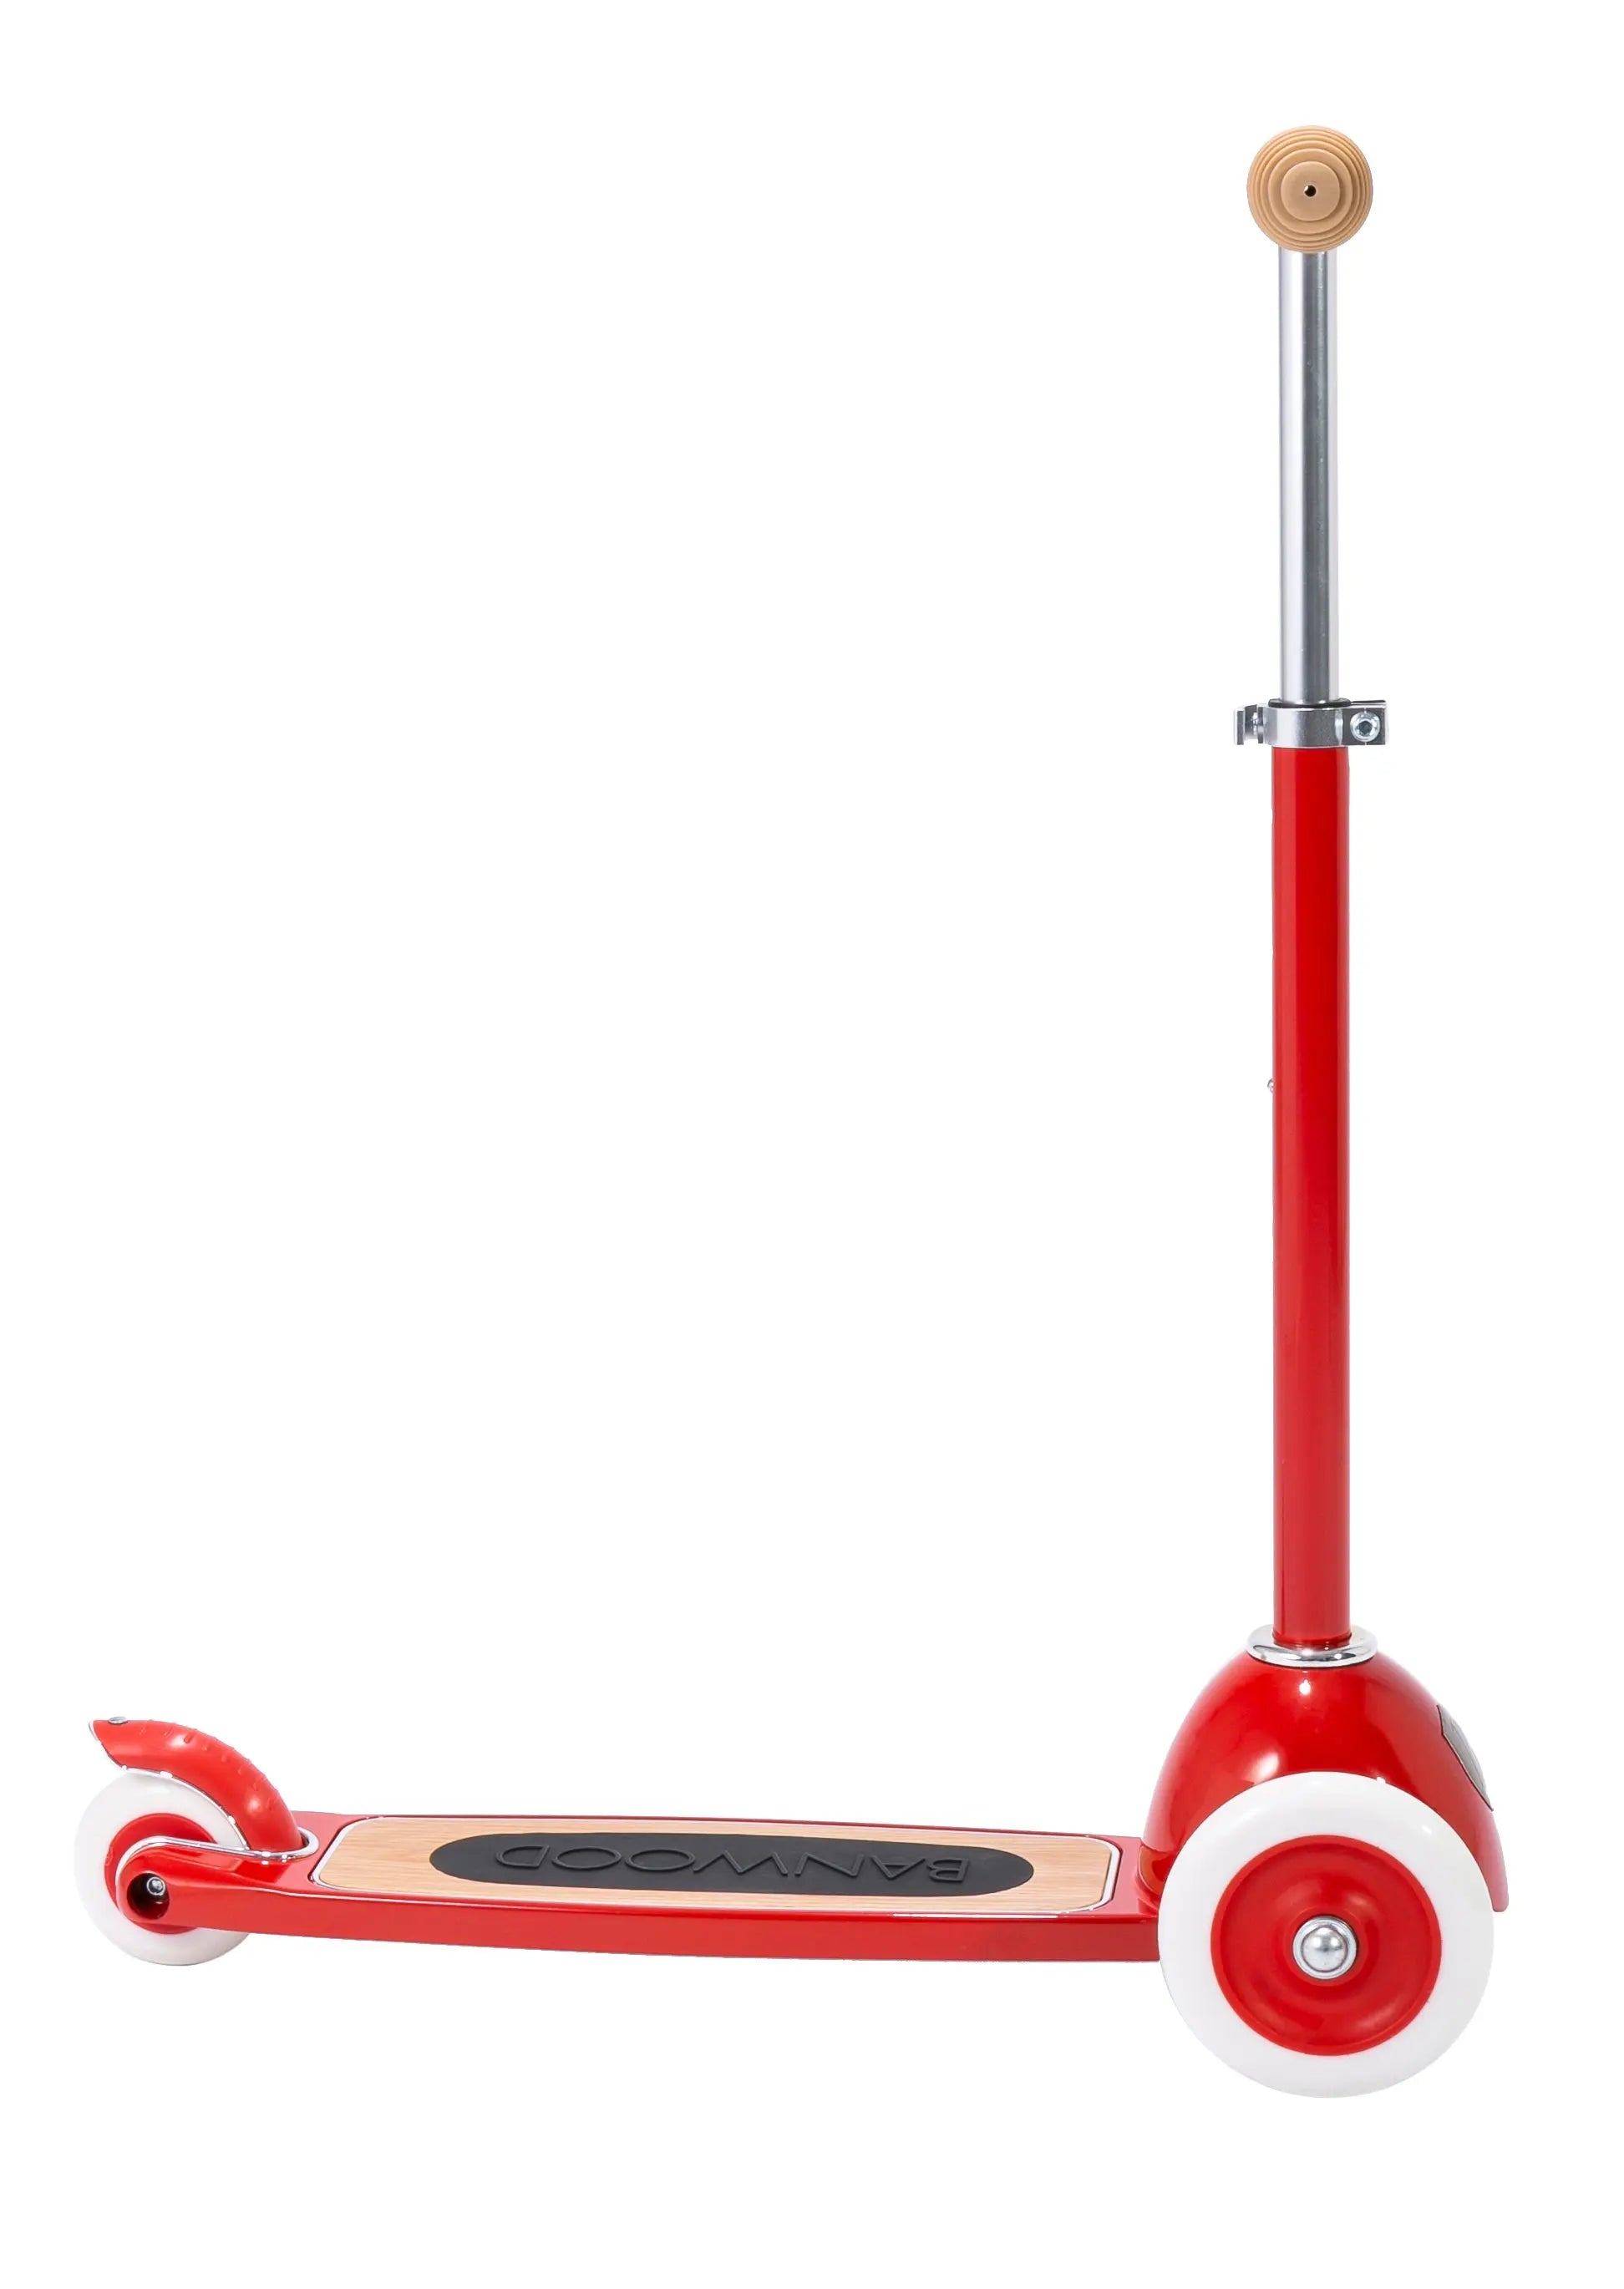 Kick Three Wheel Scooter - Red Scooter Banwood   